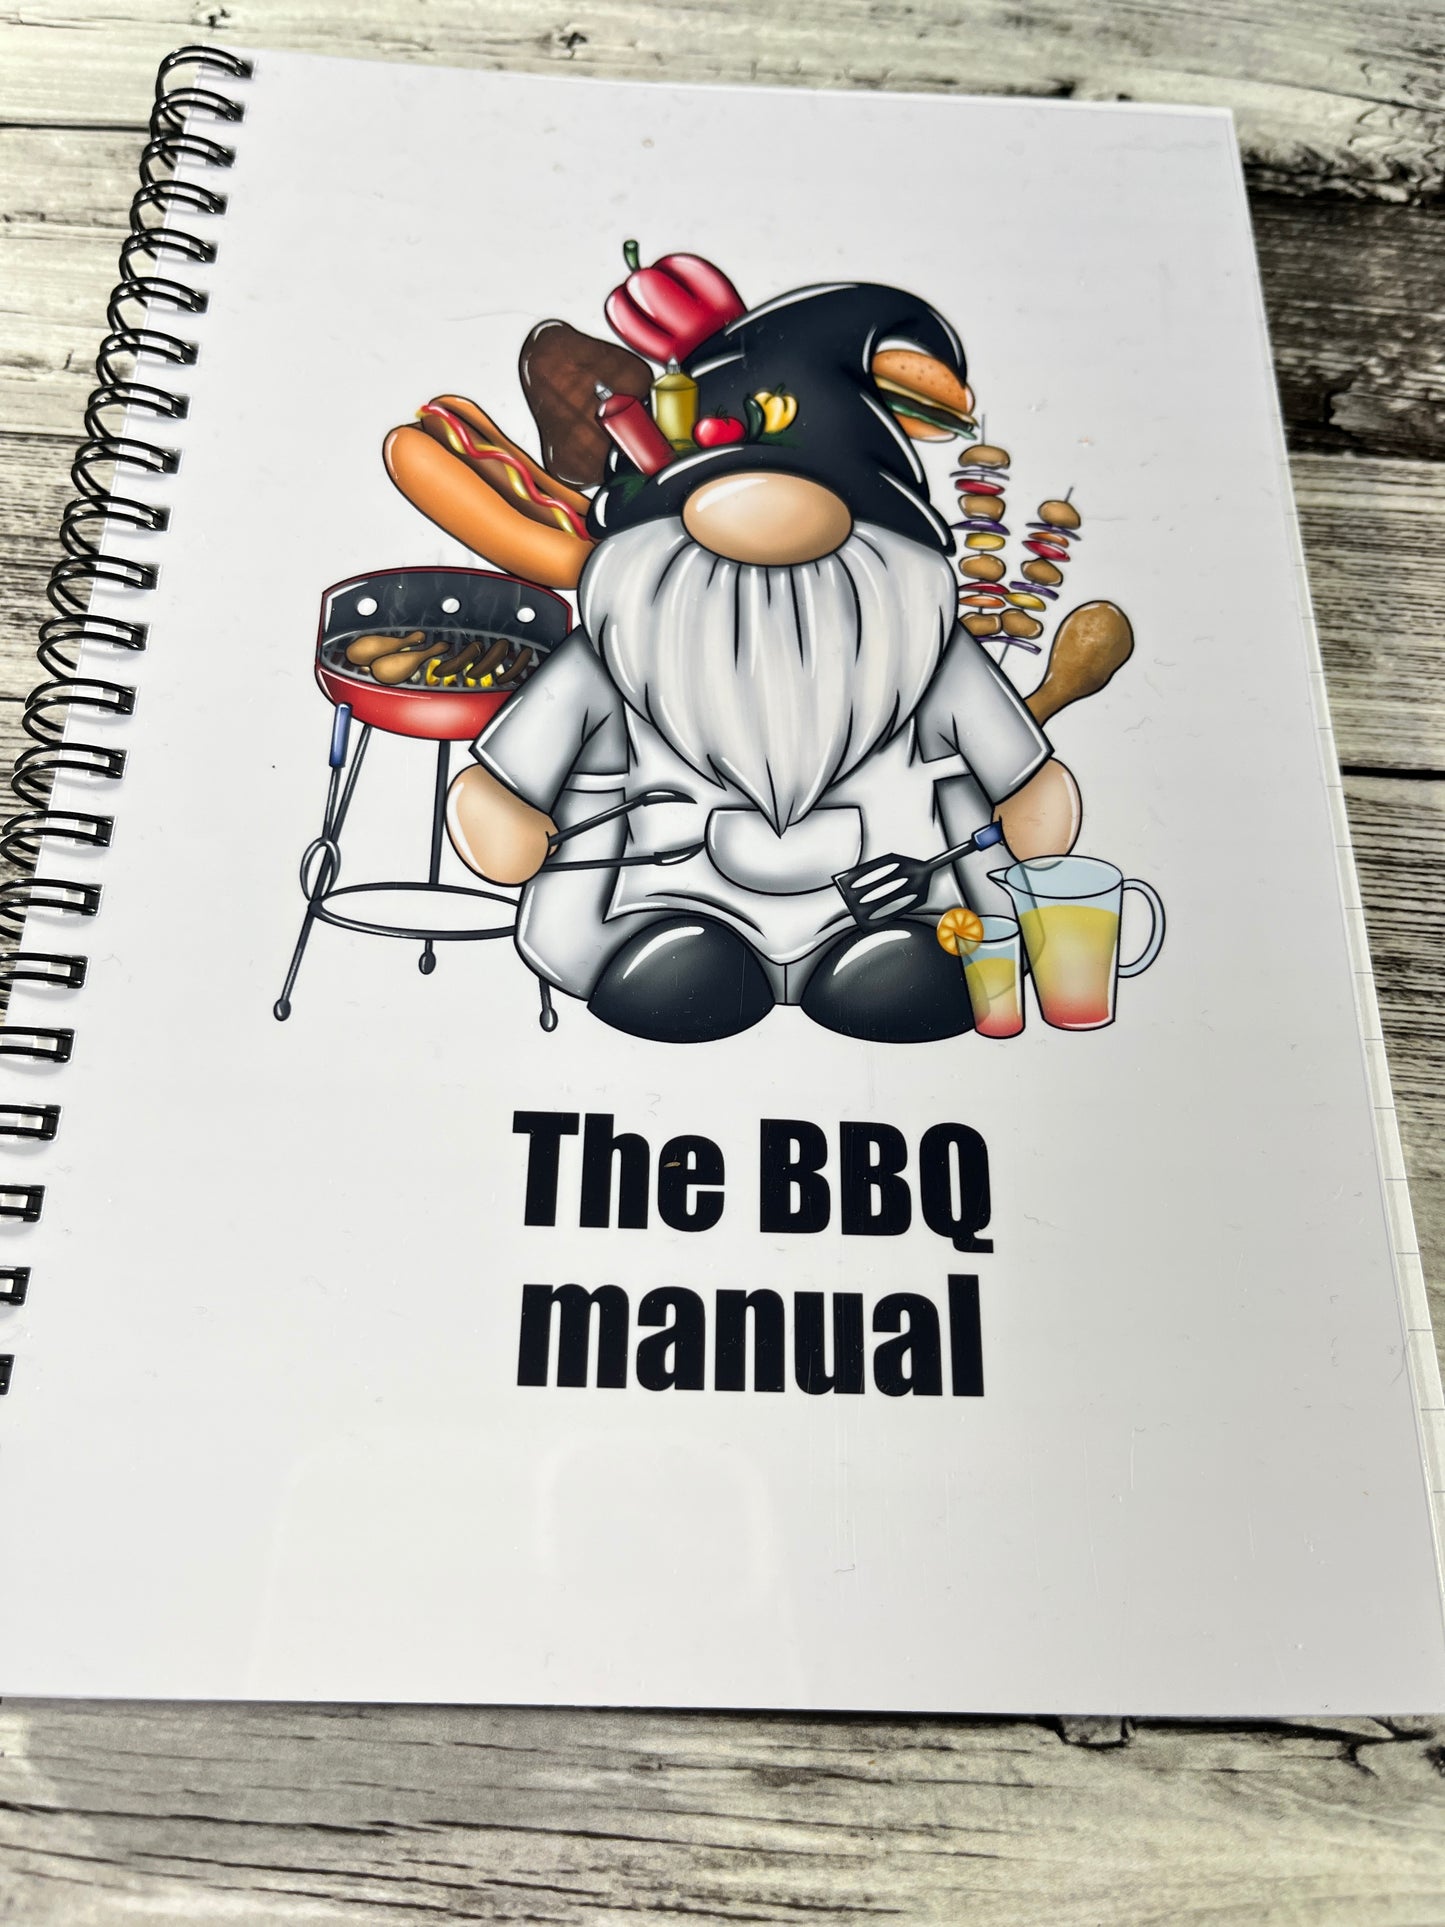 Personalised gonk theme BBQ note book.